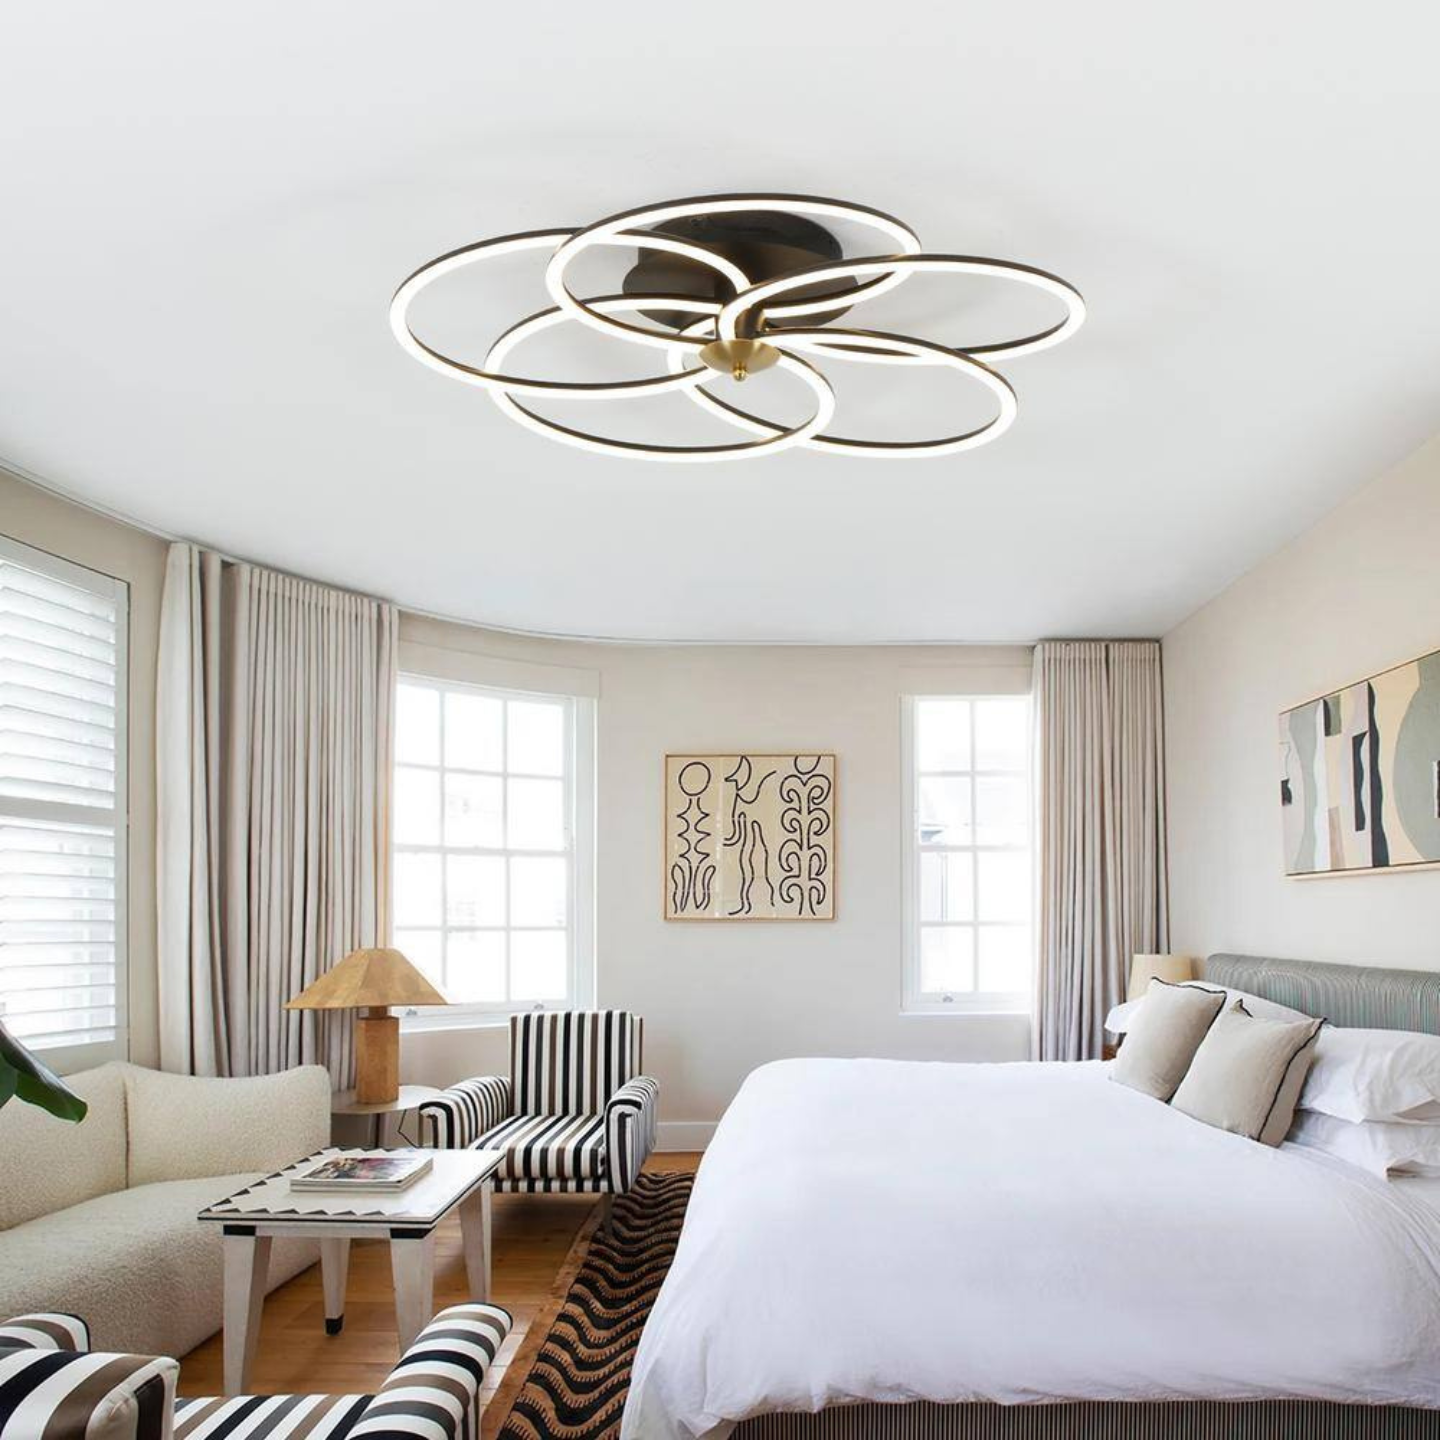 Ceiling mounted chandelier